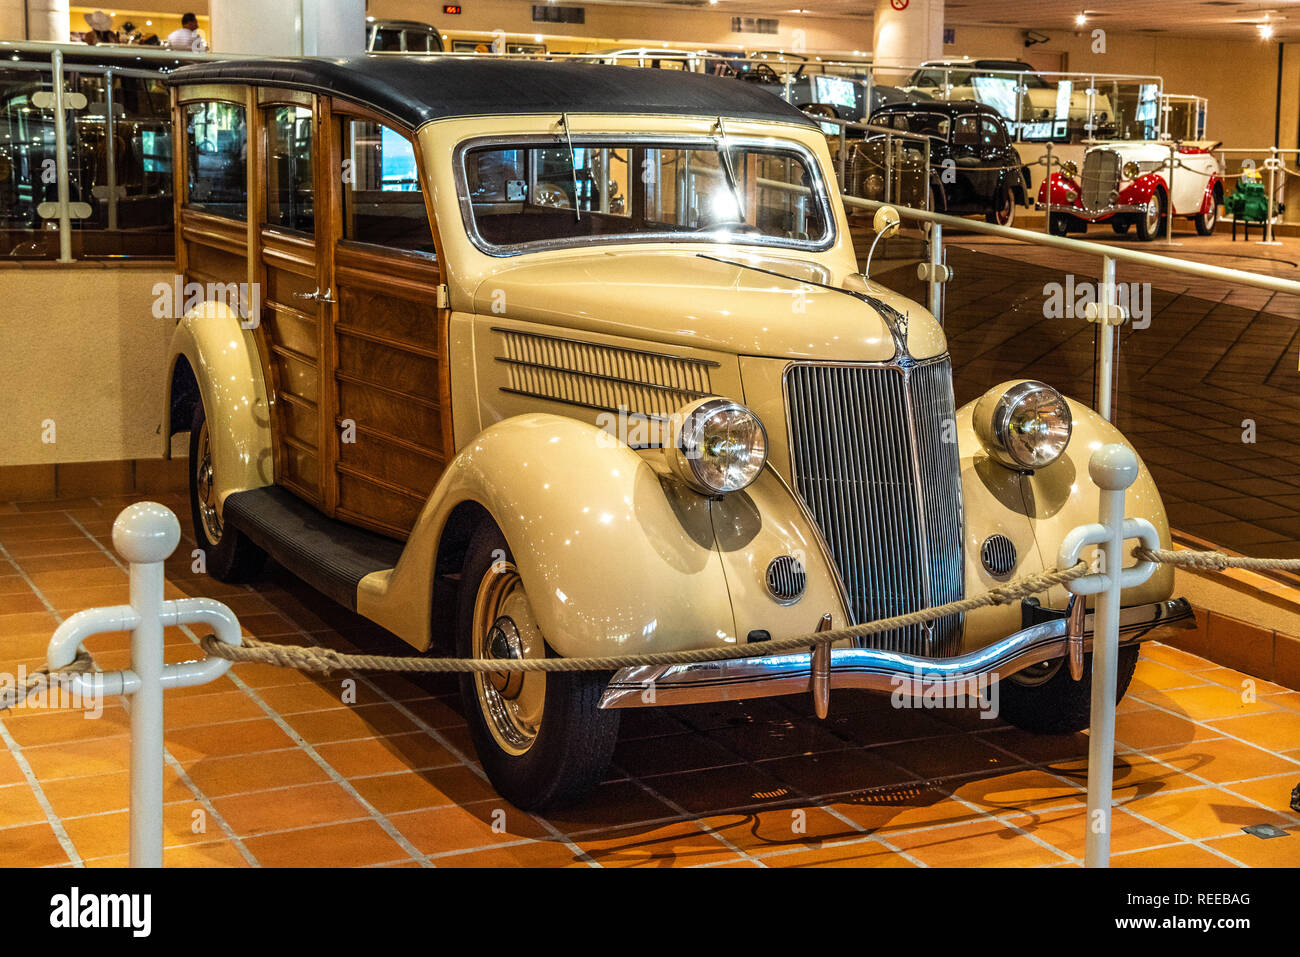 FONTVIEILLE, MONACO - Jun 2017: beige FORD PAUSE DE CHASSE 68 1937 in Monaco Top Cars Collection Museum. Stockfoto